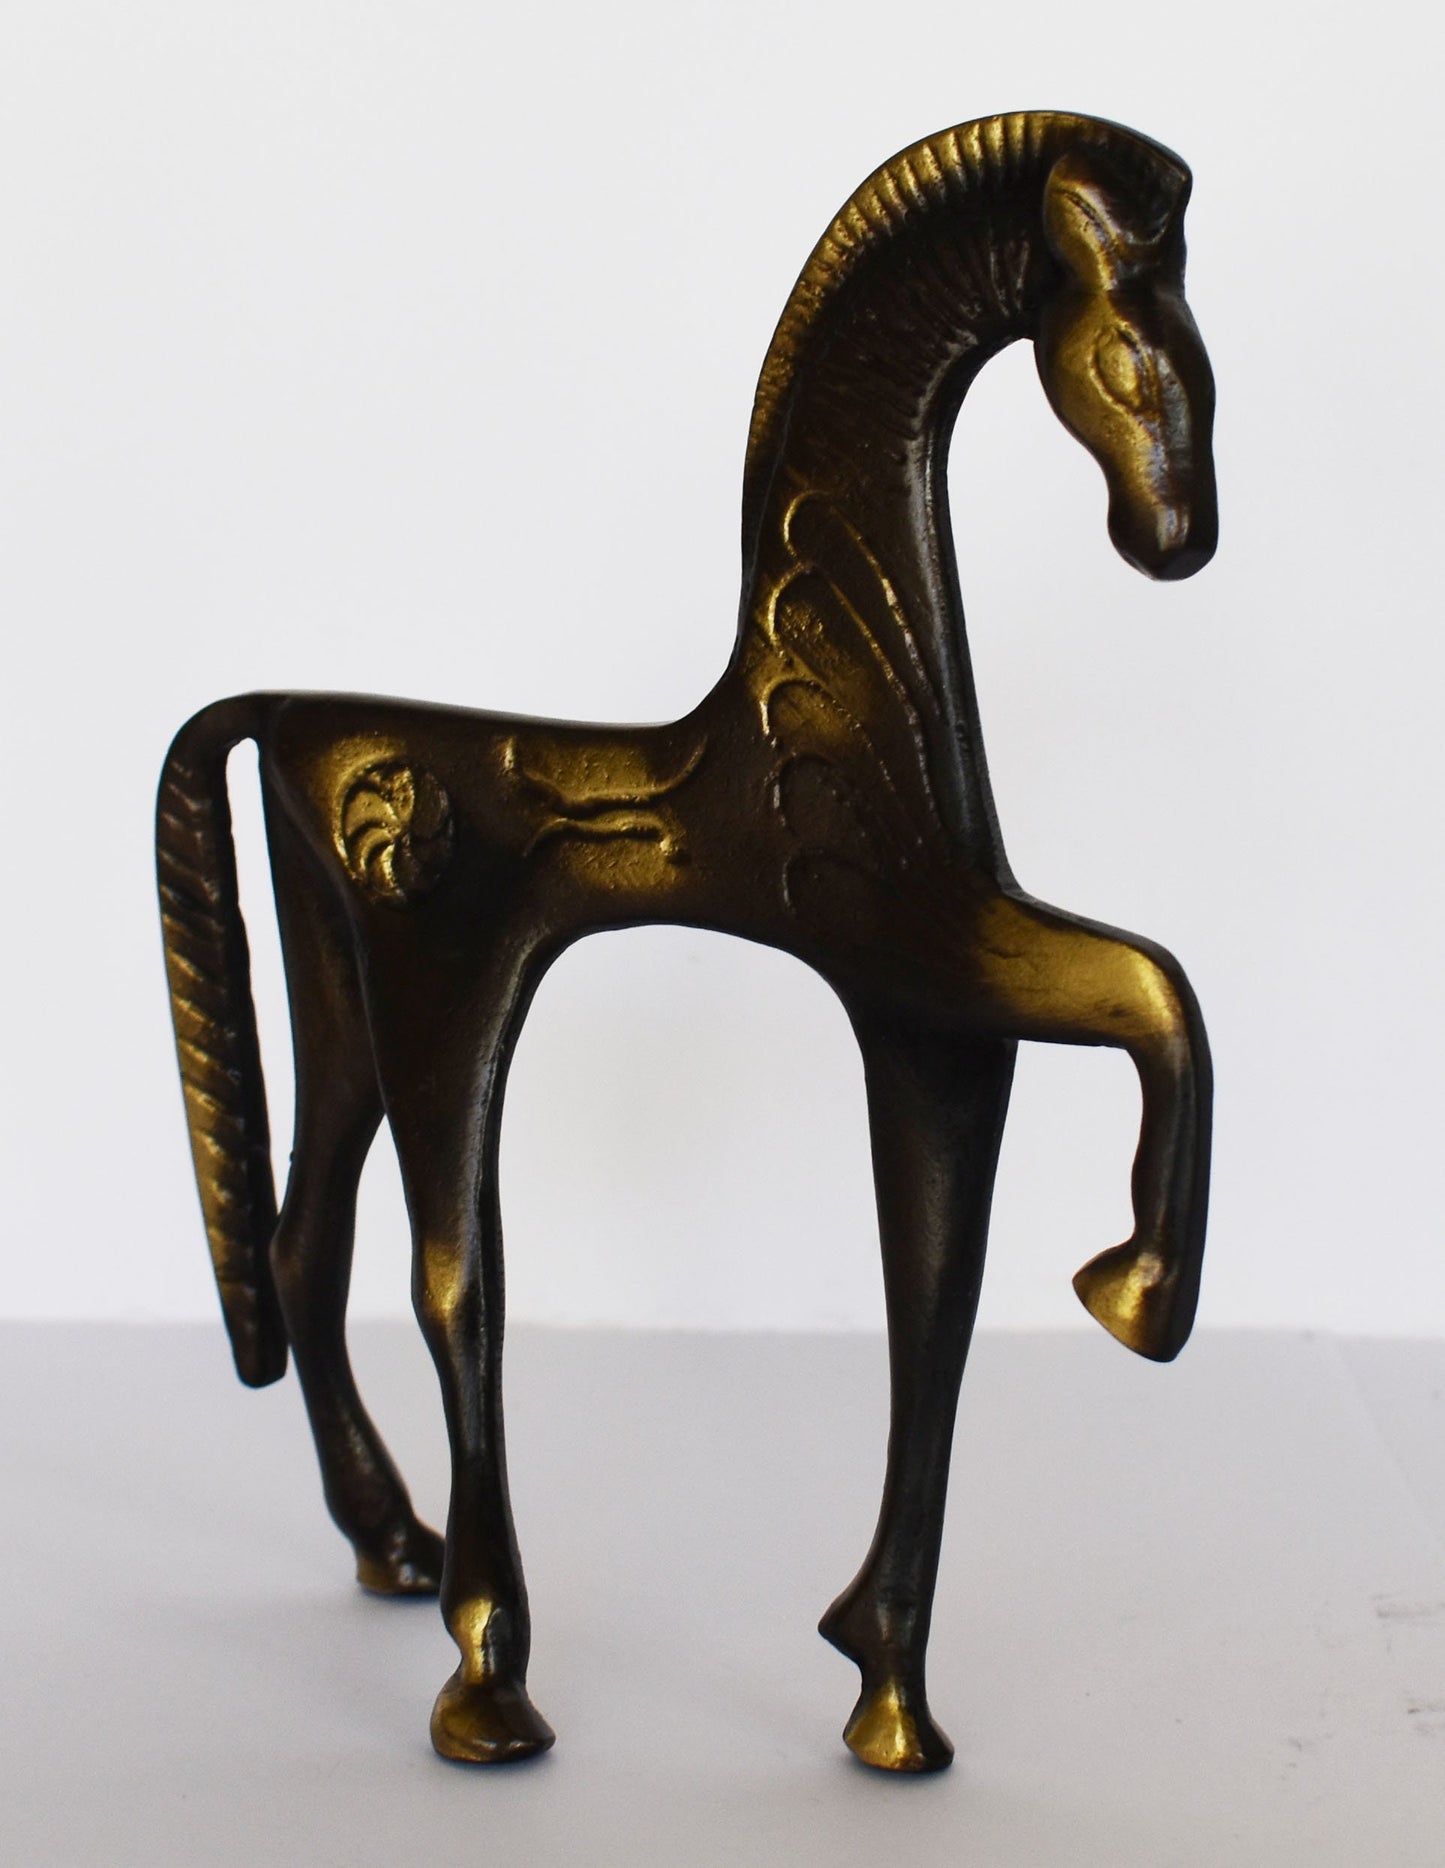 Ancient Greek Horse - In motion - pure Bronze Sculpture - Symbol of Wealth and Prosperity